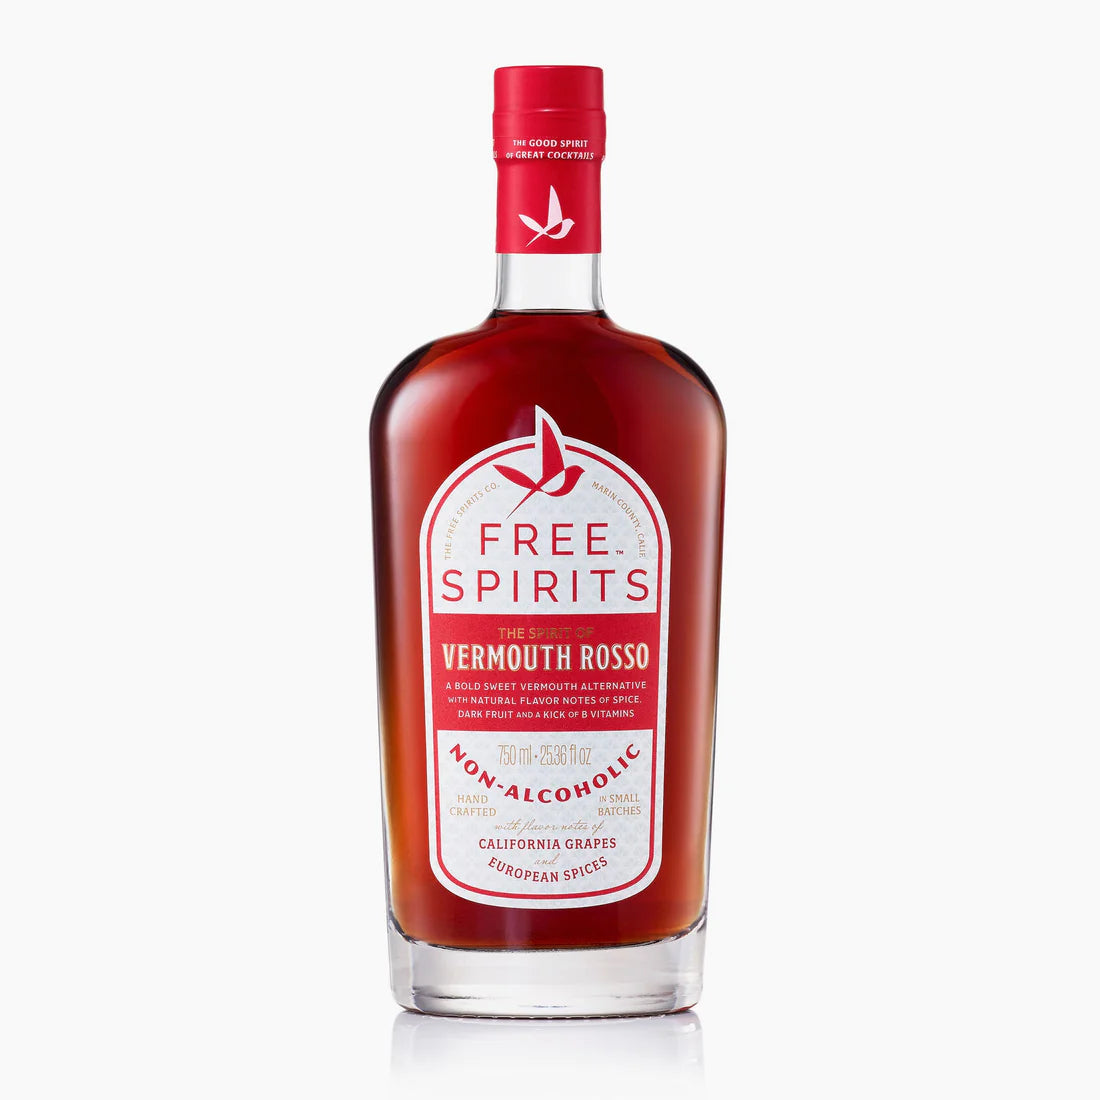 free spirits' vermouth rosso bottle